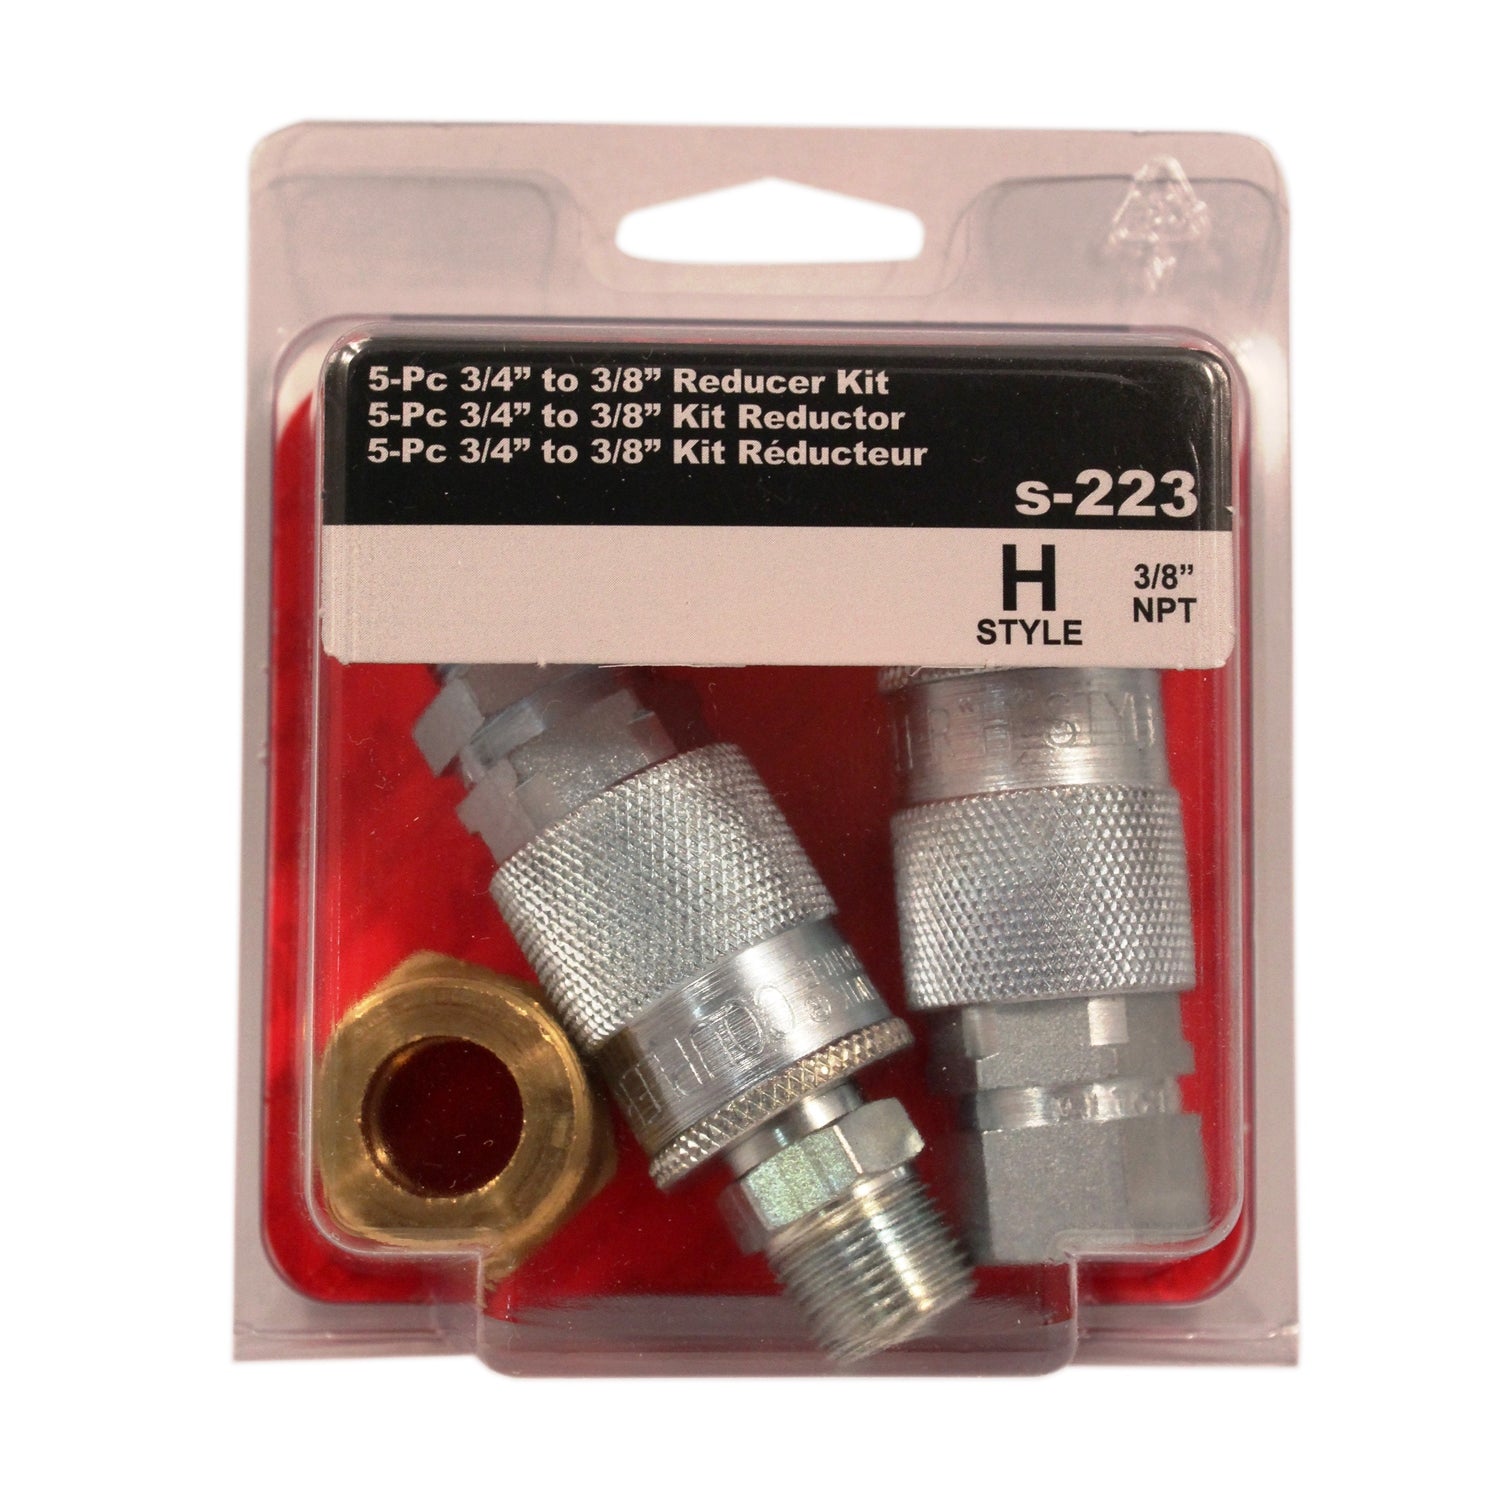 s-223 packaged